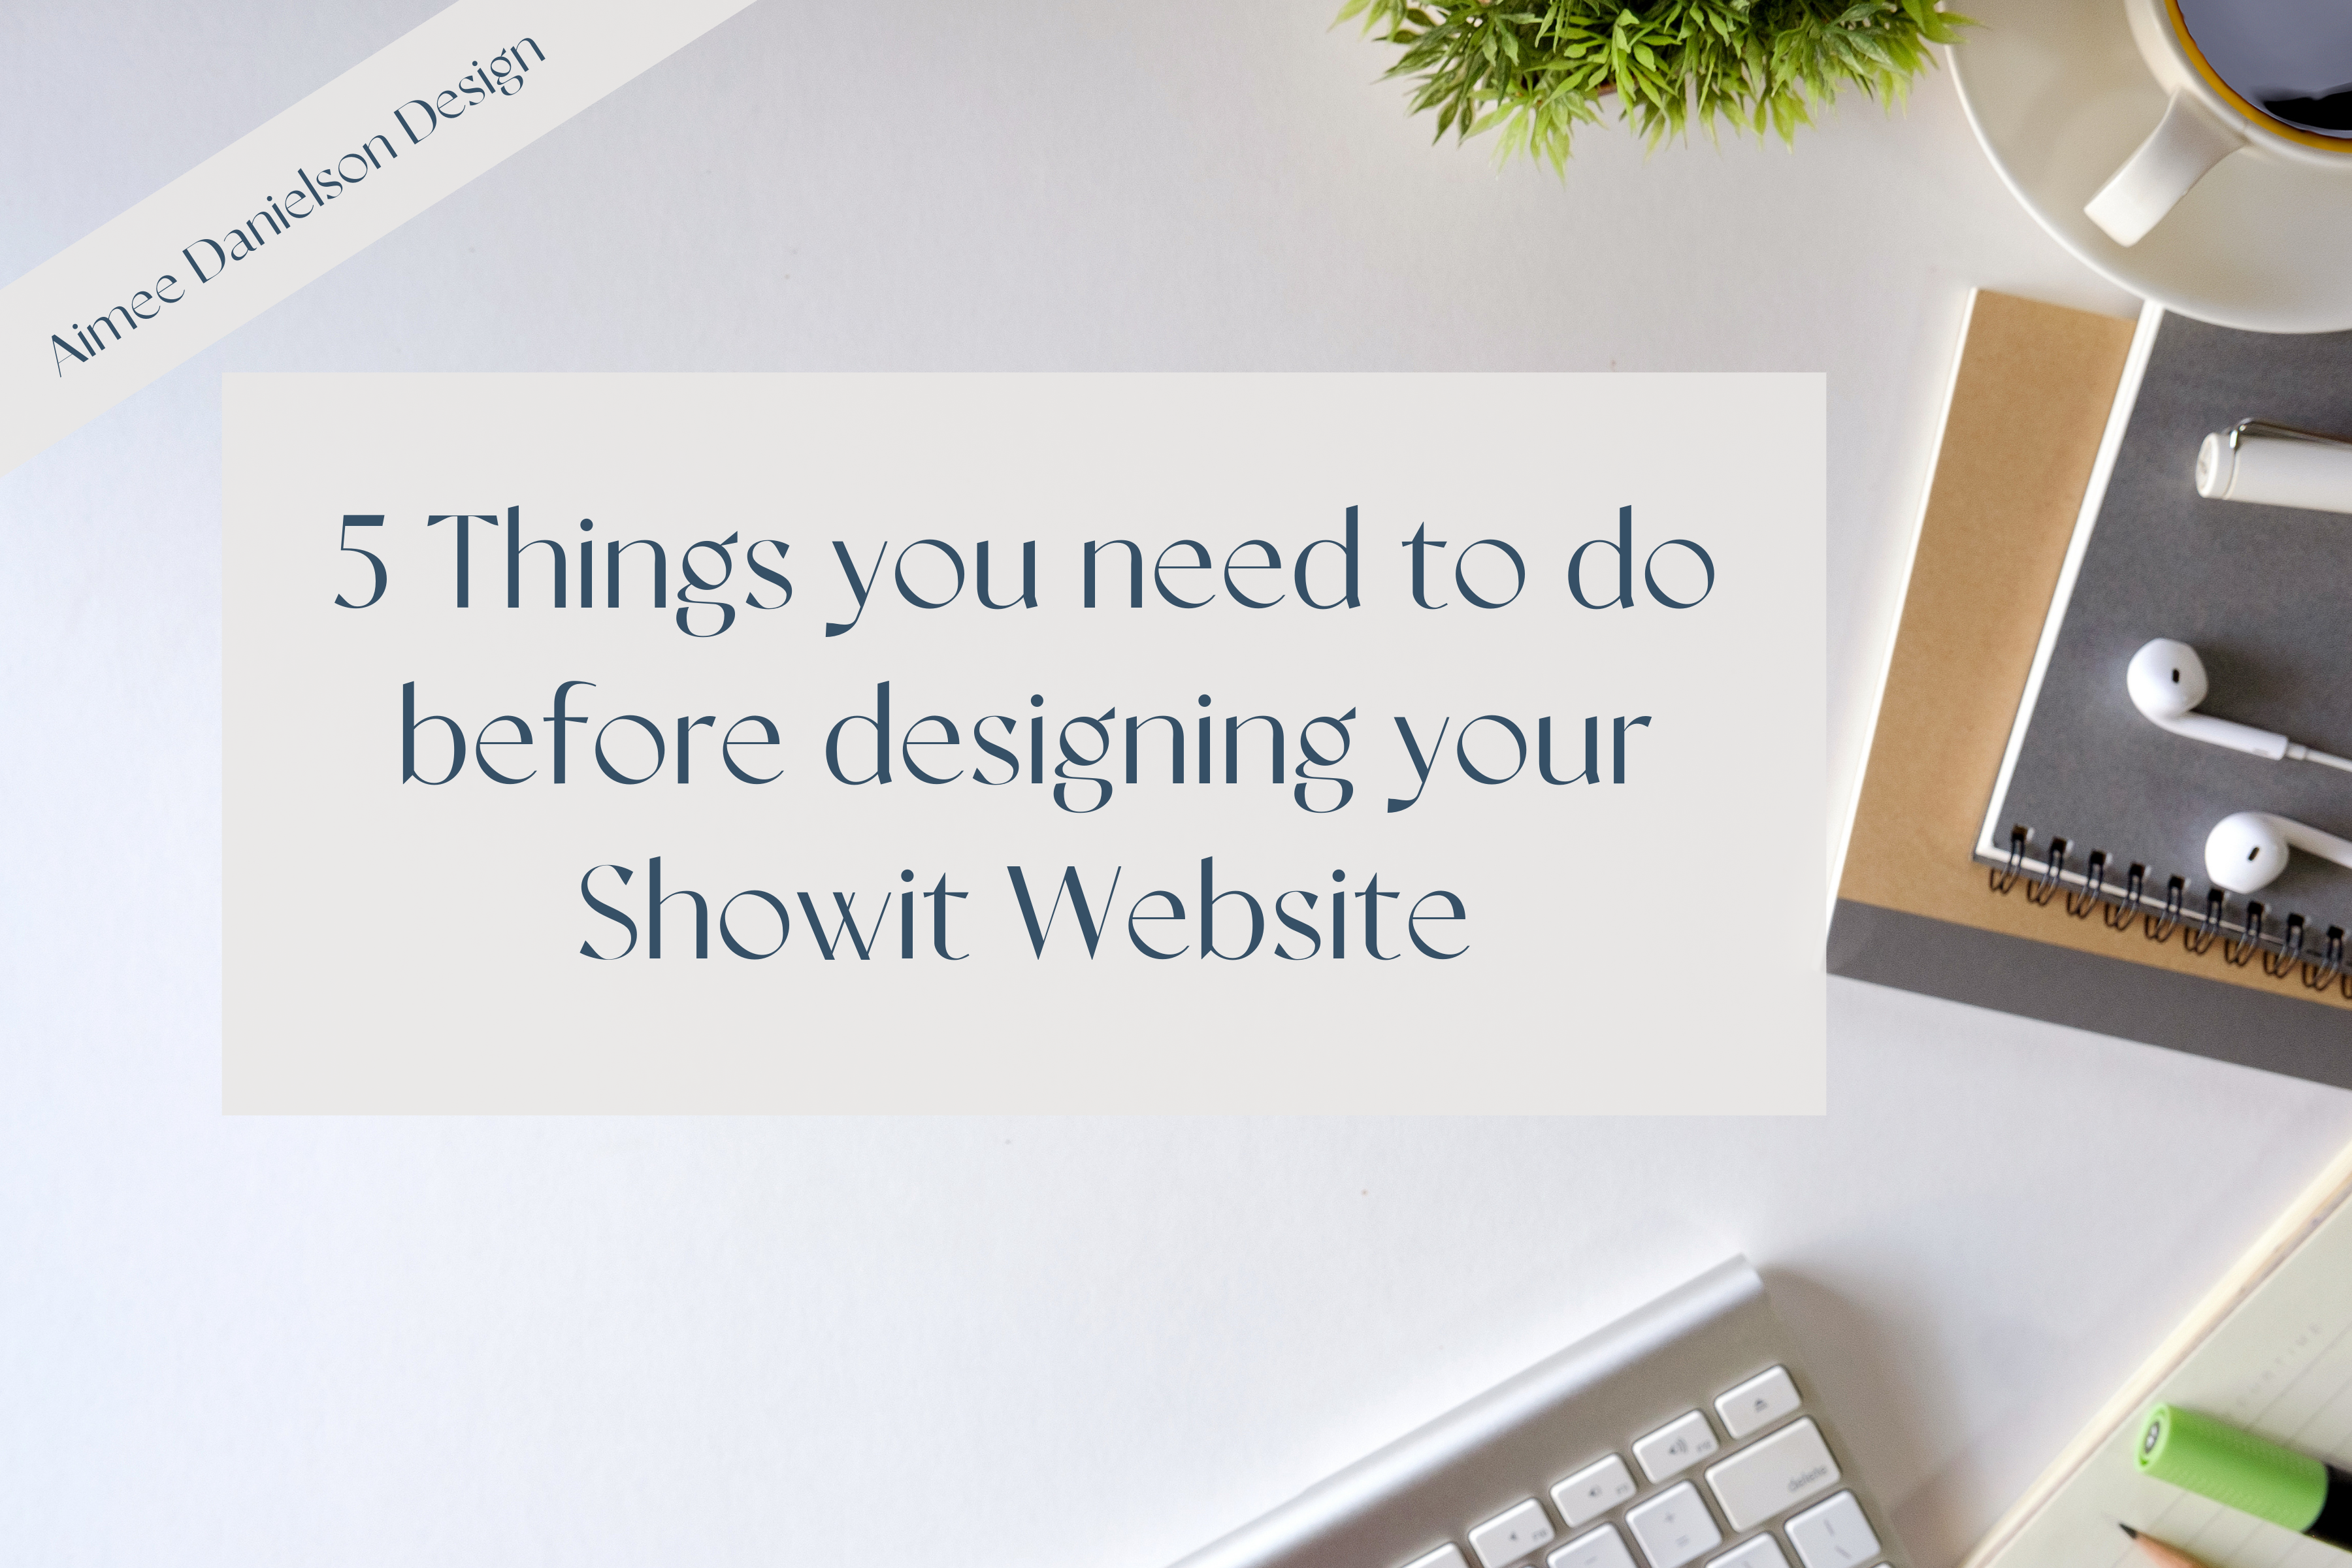 5 Things you need to do before designing your Showit Website